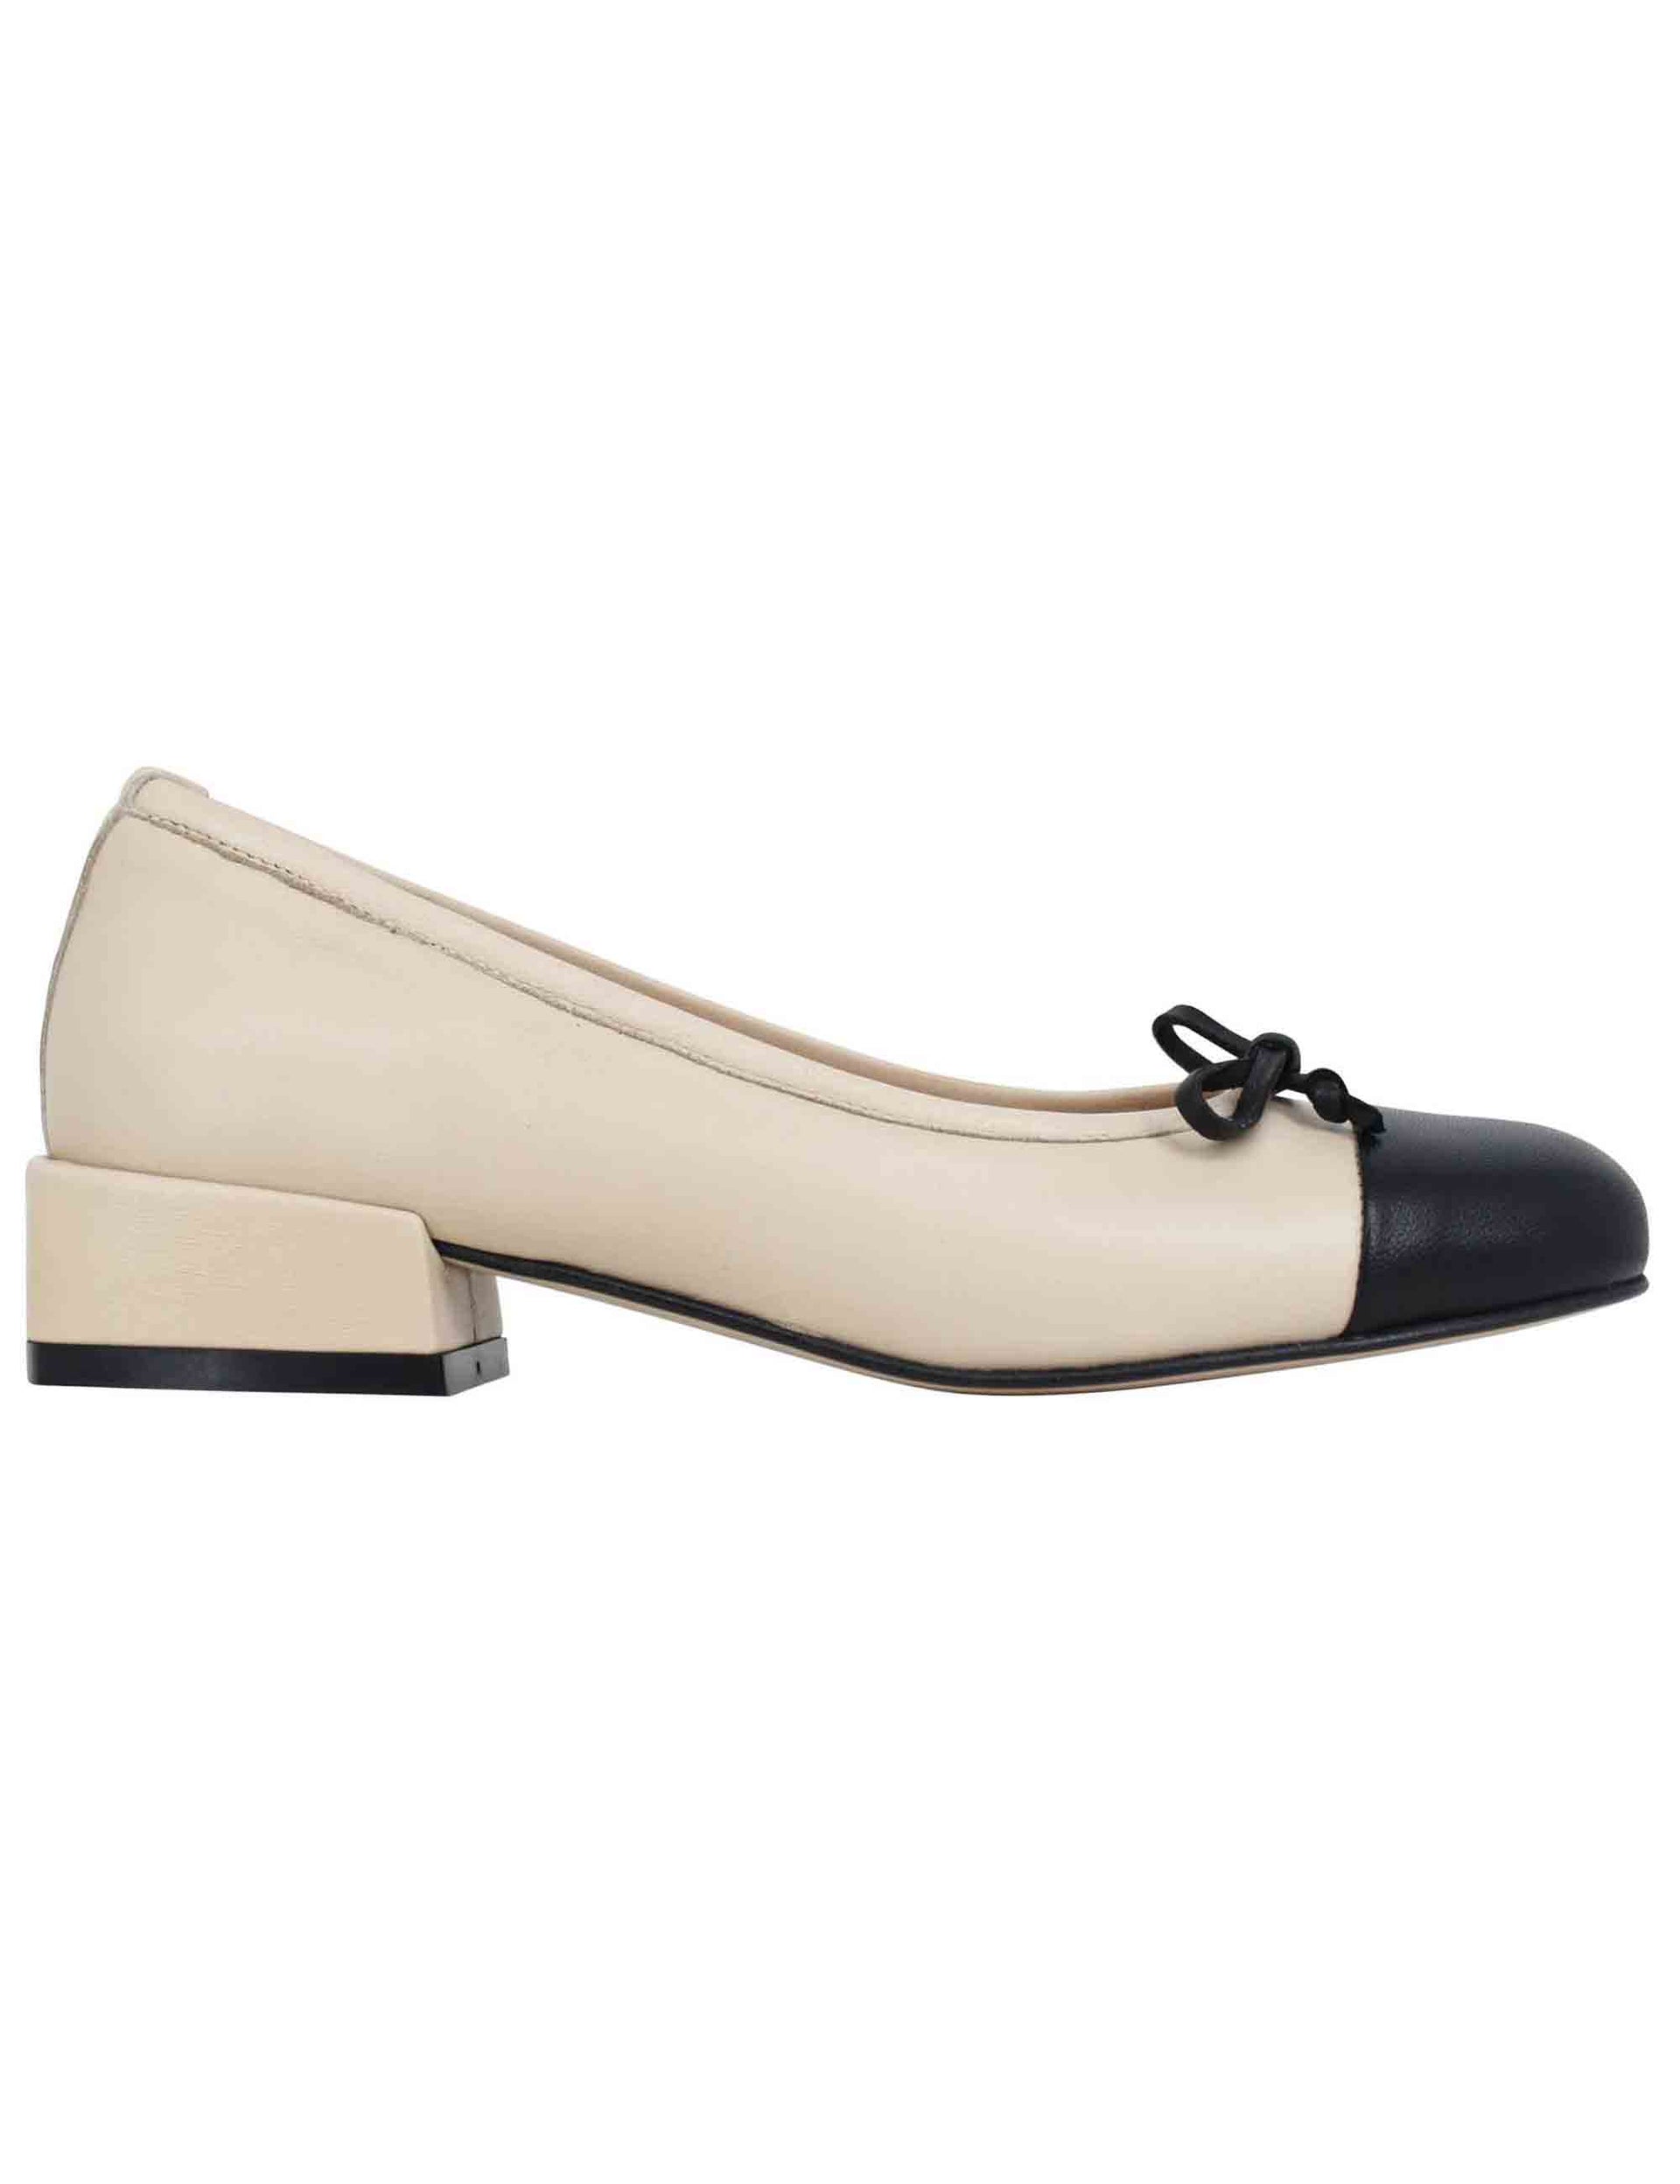 Women's beige leather ballet flats with black toe cap and bow